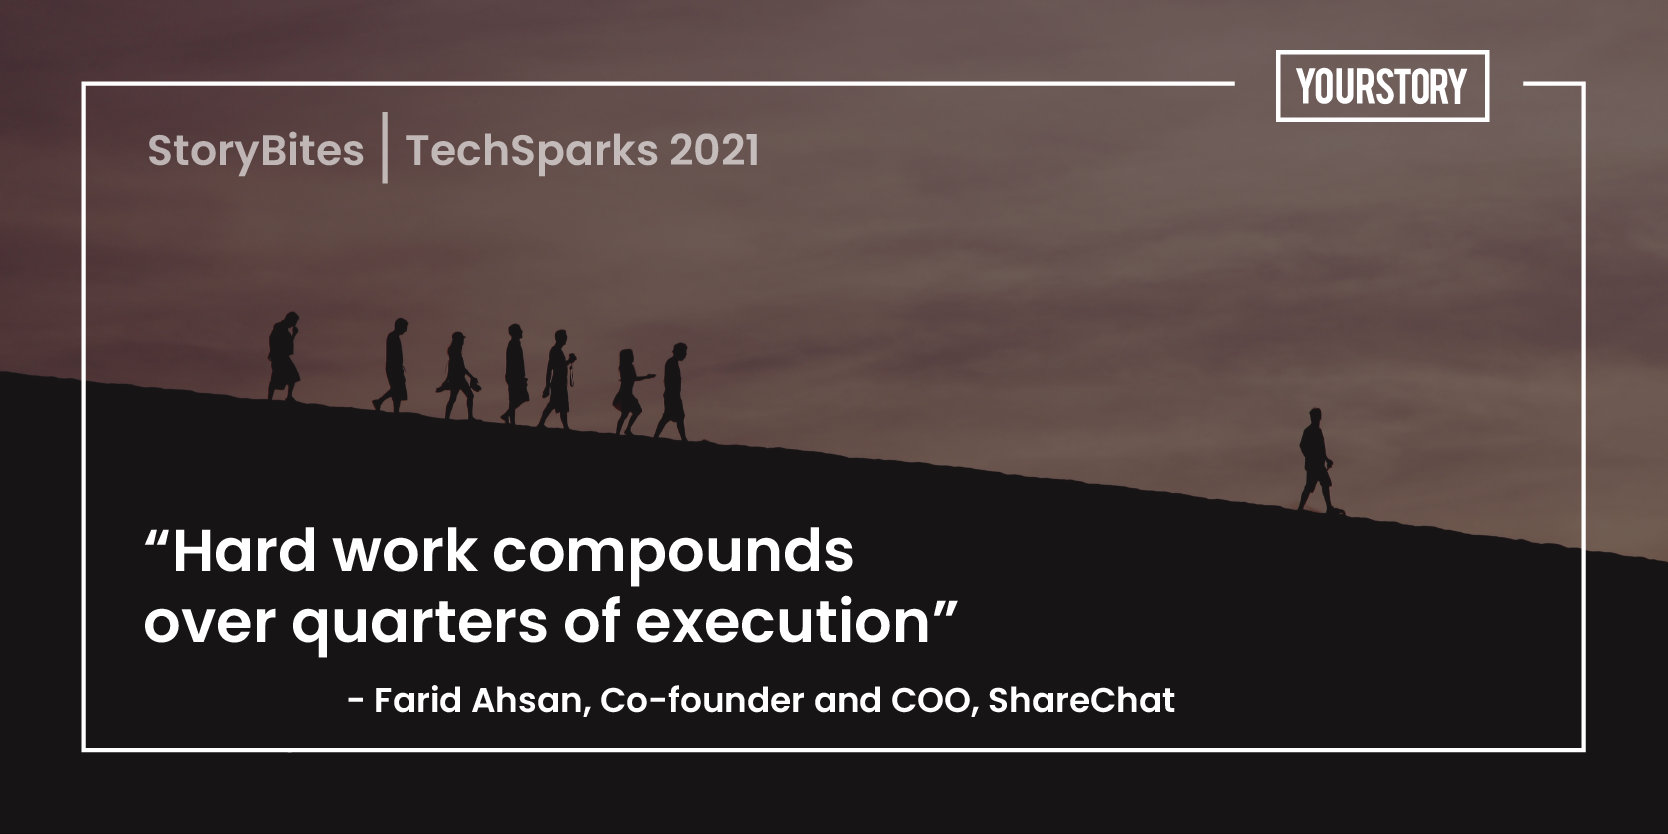 ‘Hard work compounds over quarters of execution’ – 30 quotes on leadership and business success from TechSparks 2021